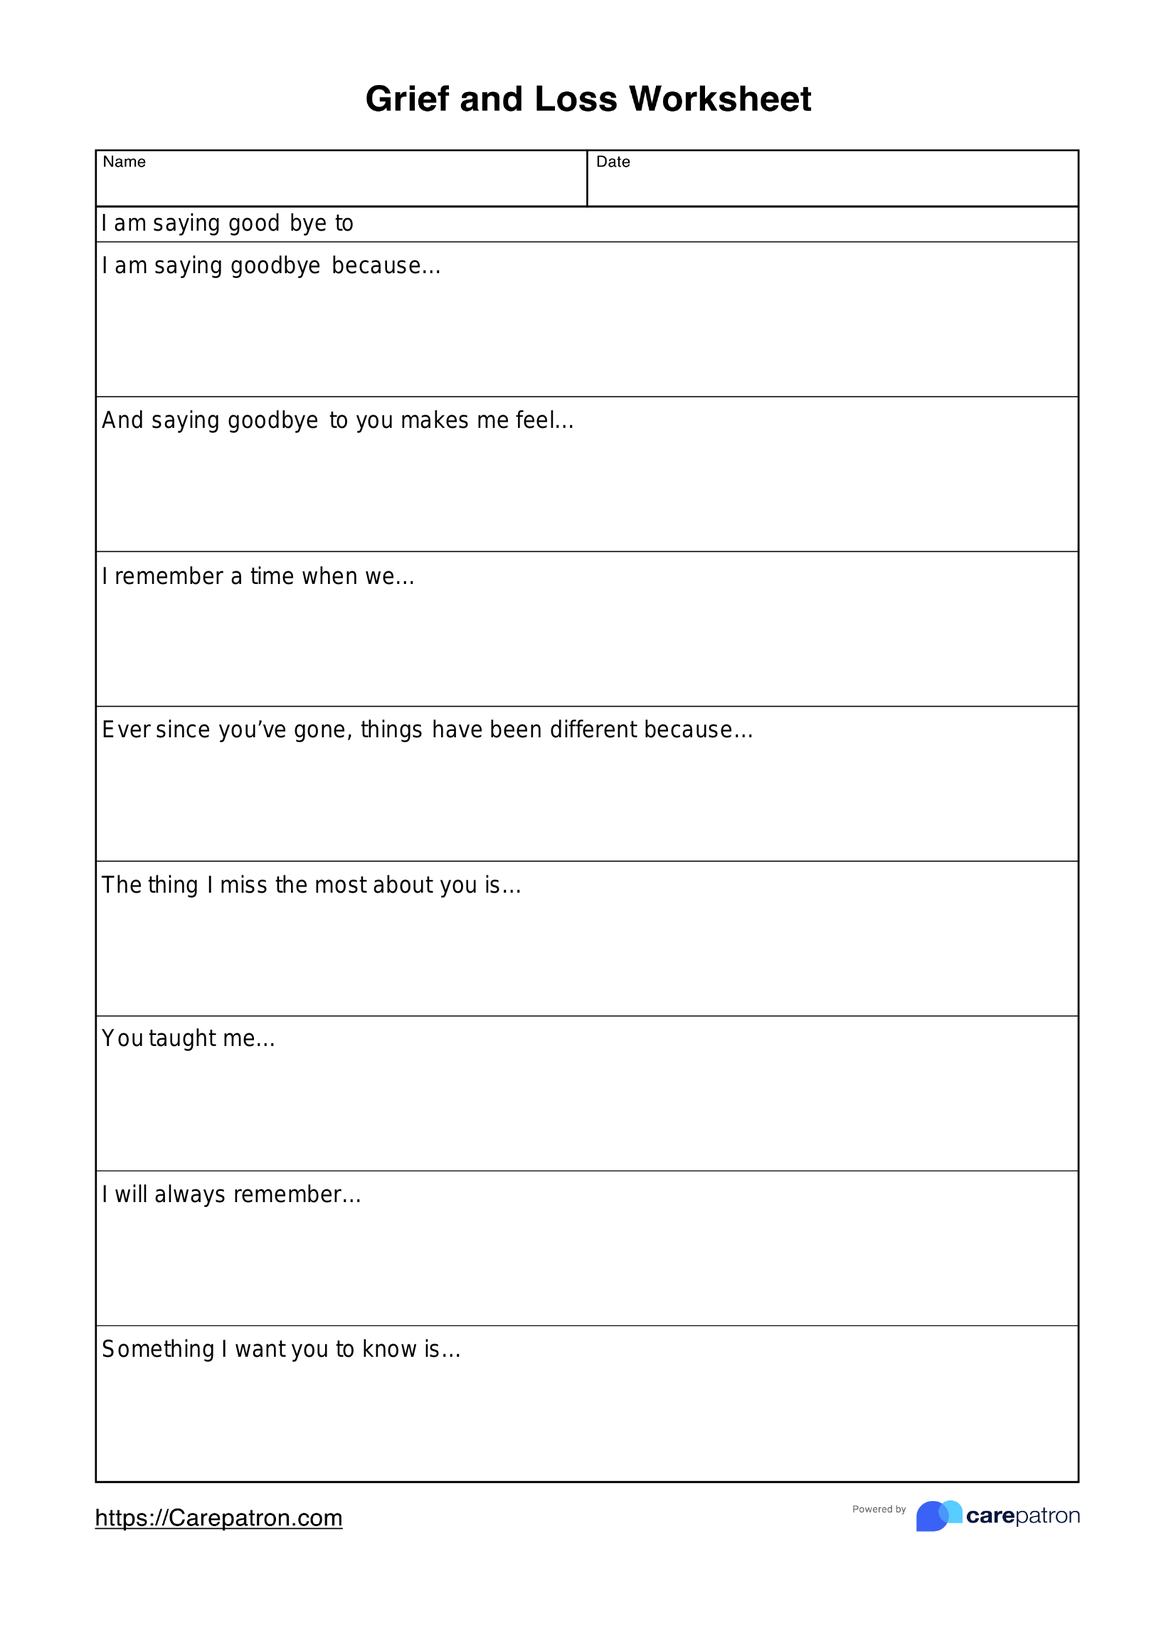 Grief and Loss Worksheet PDF Example